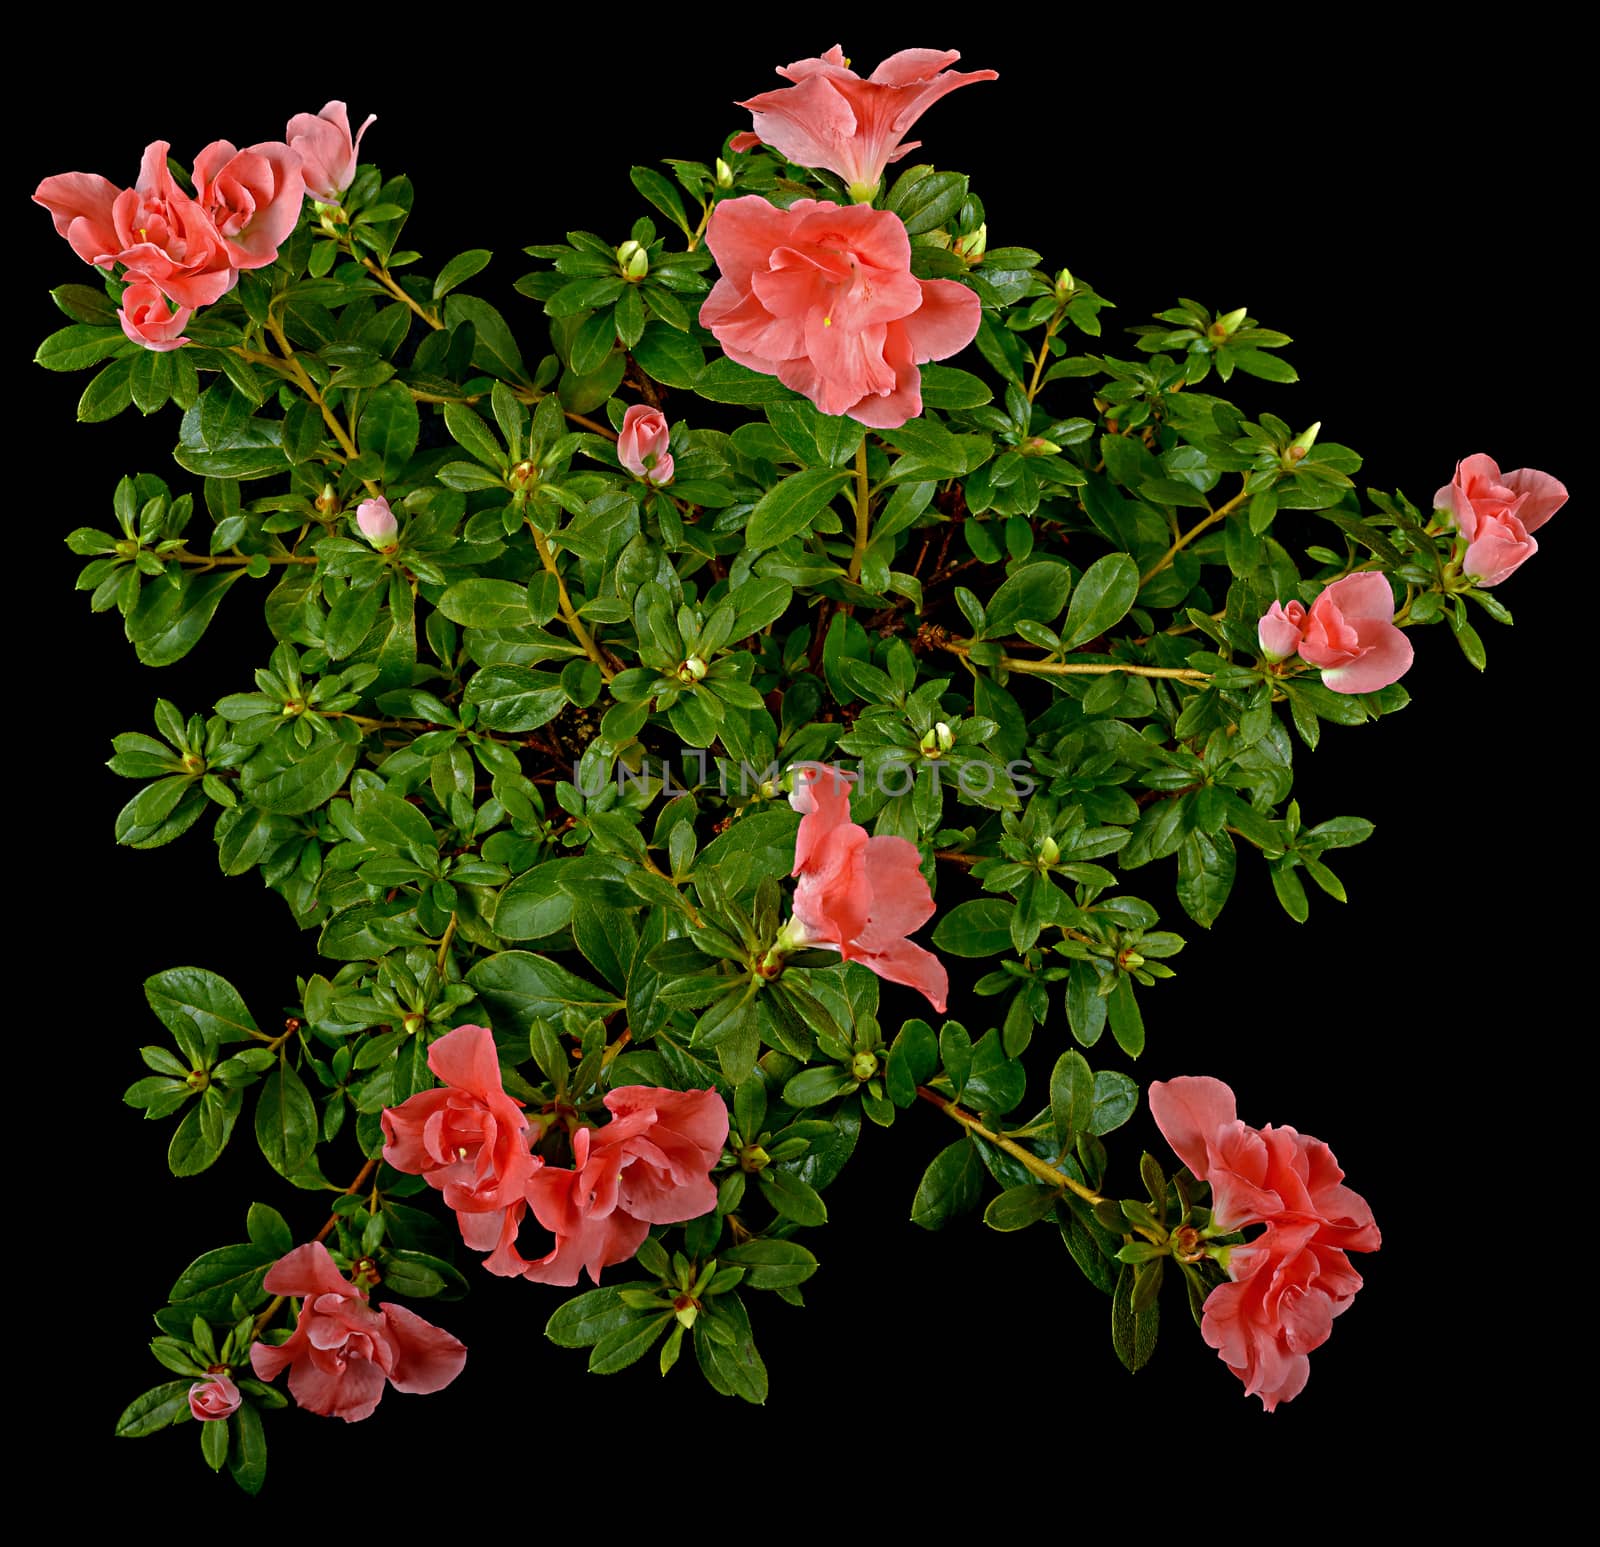 Pink unveiled flowers and azalia buds with green and fluffy leaves on a black background.